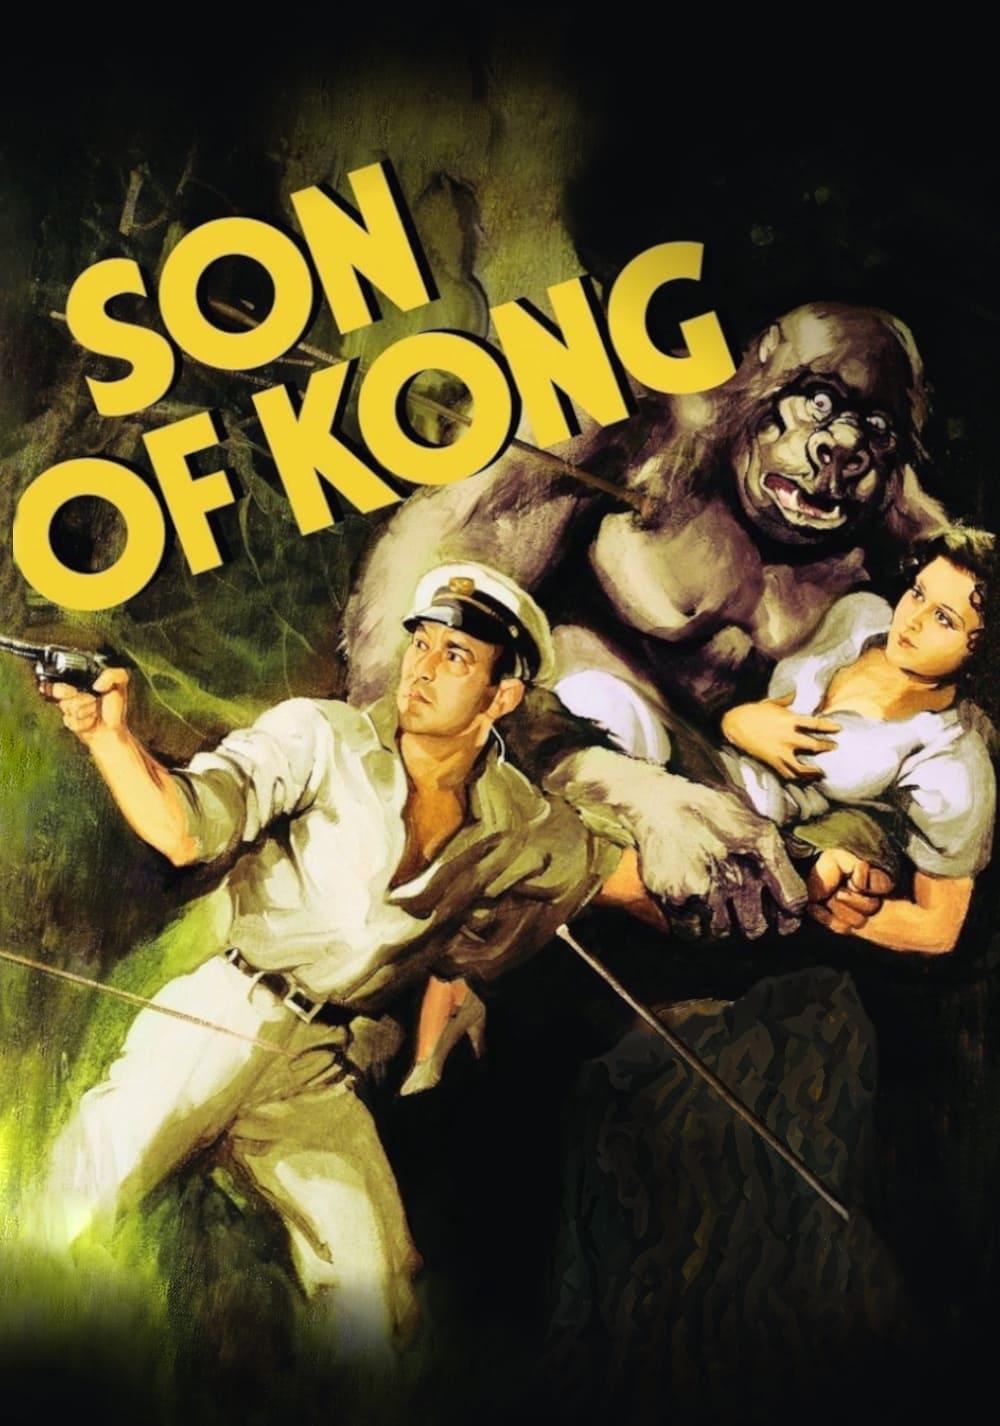 The Son of Kong poster